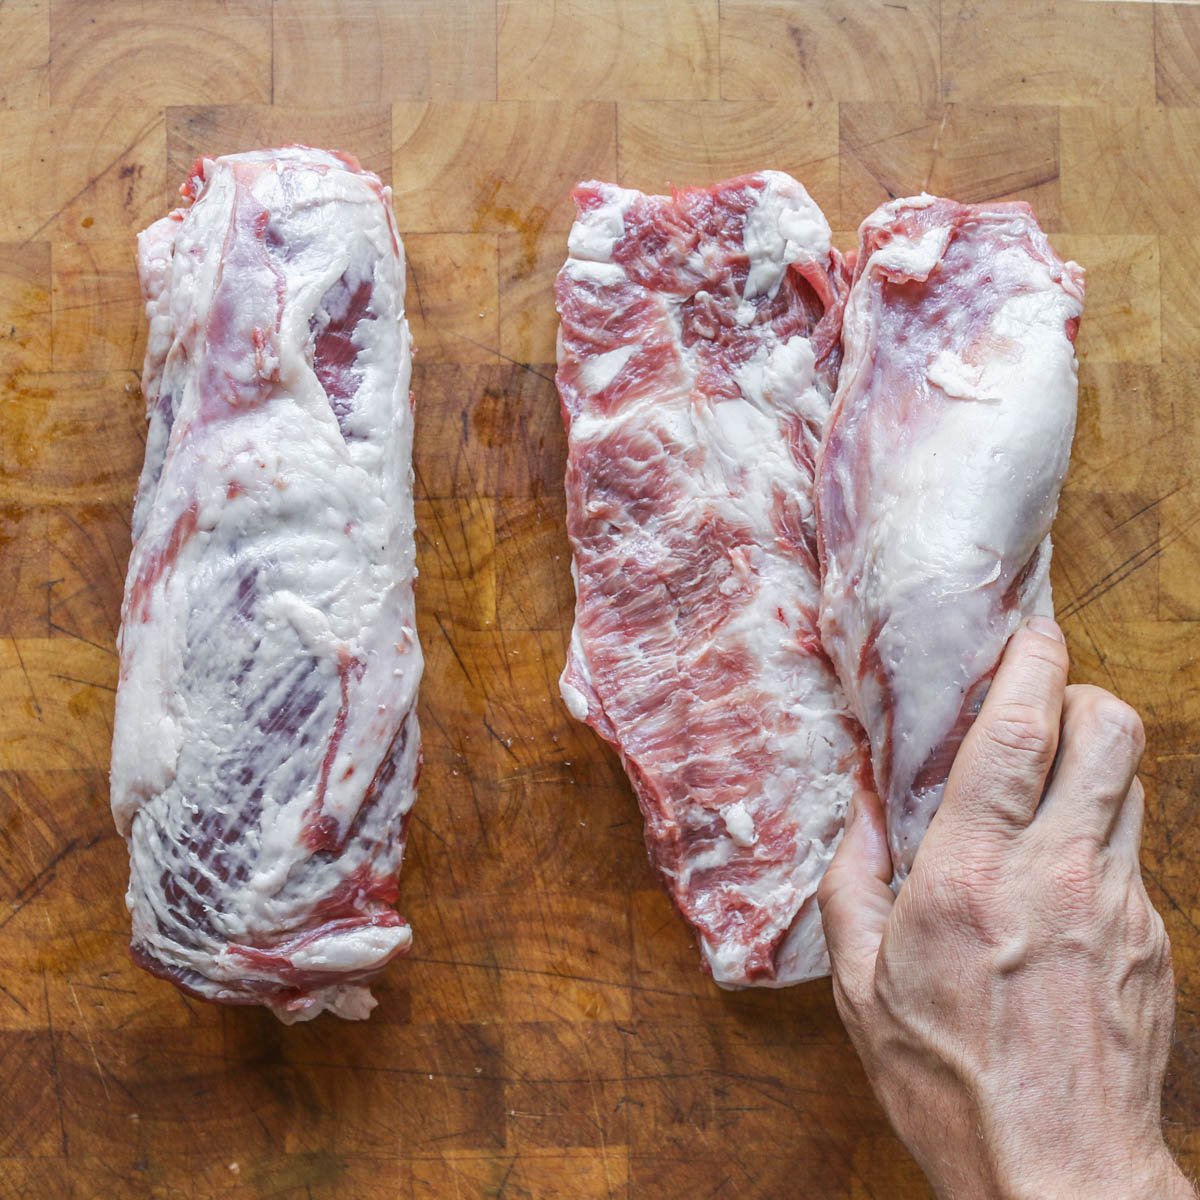 Lamb breast brought to room temperature before removing meat